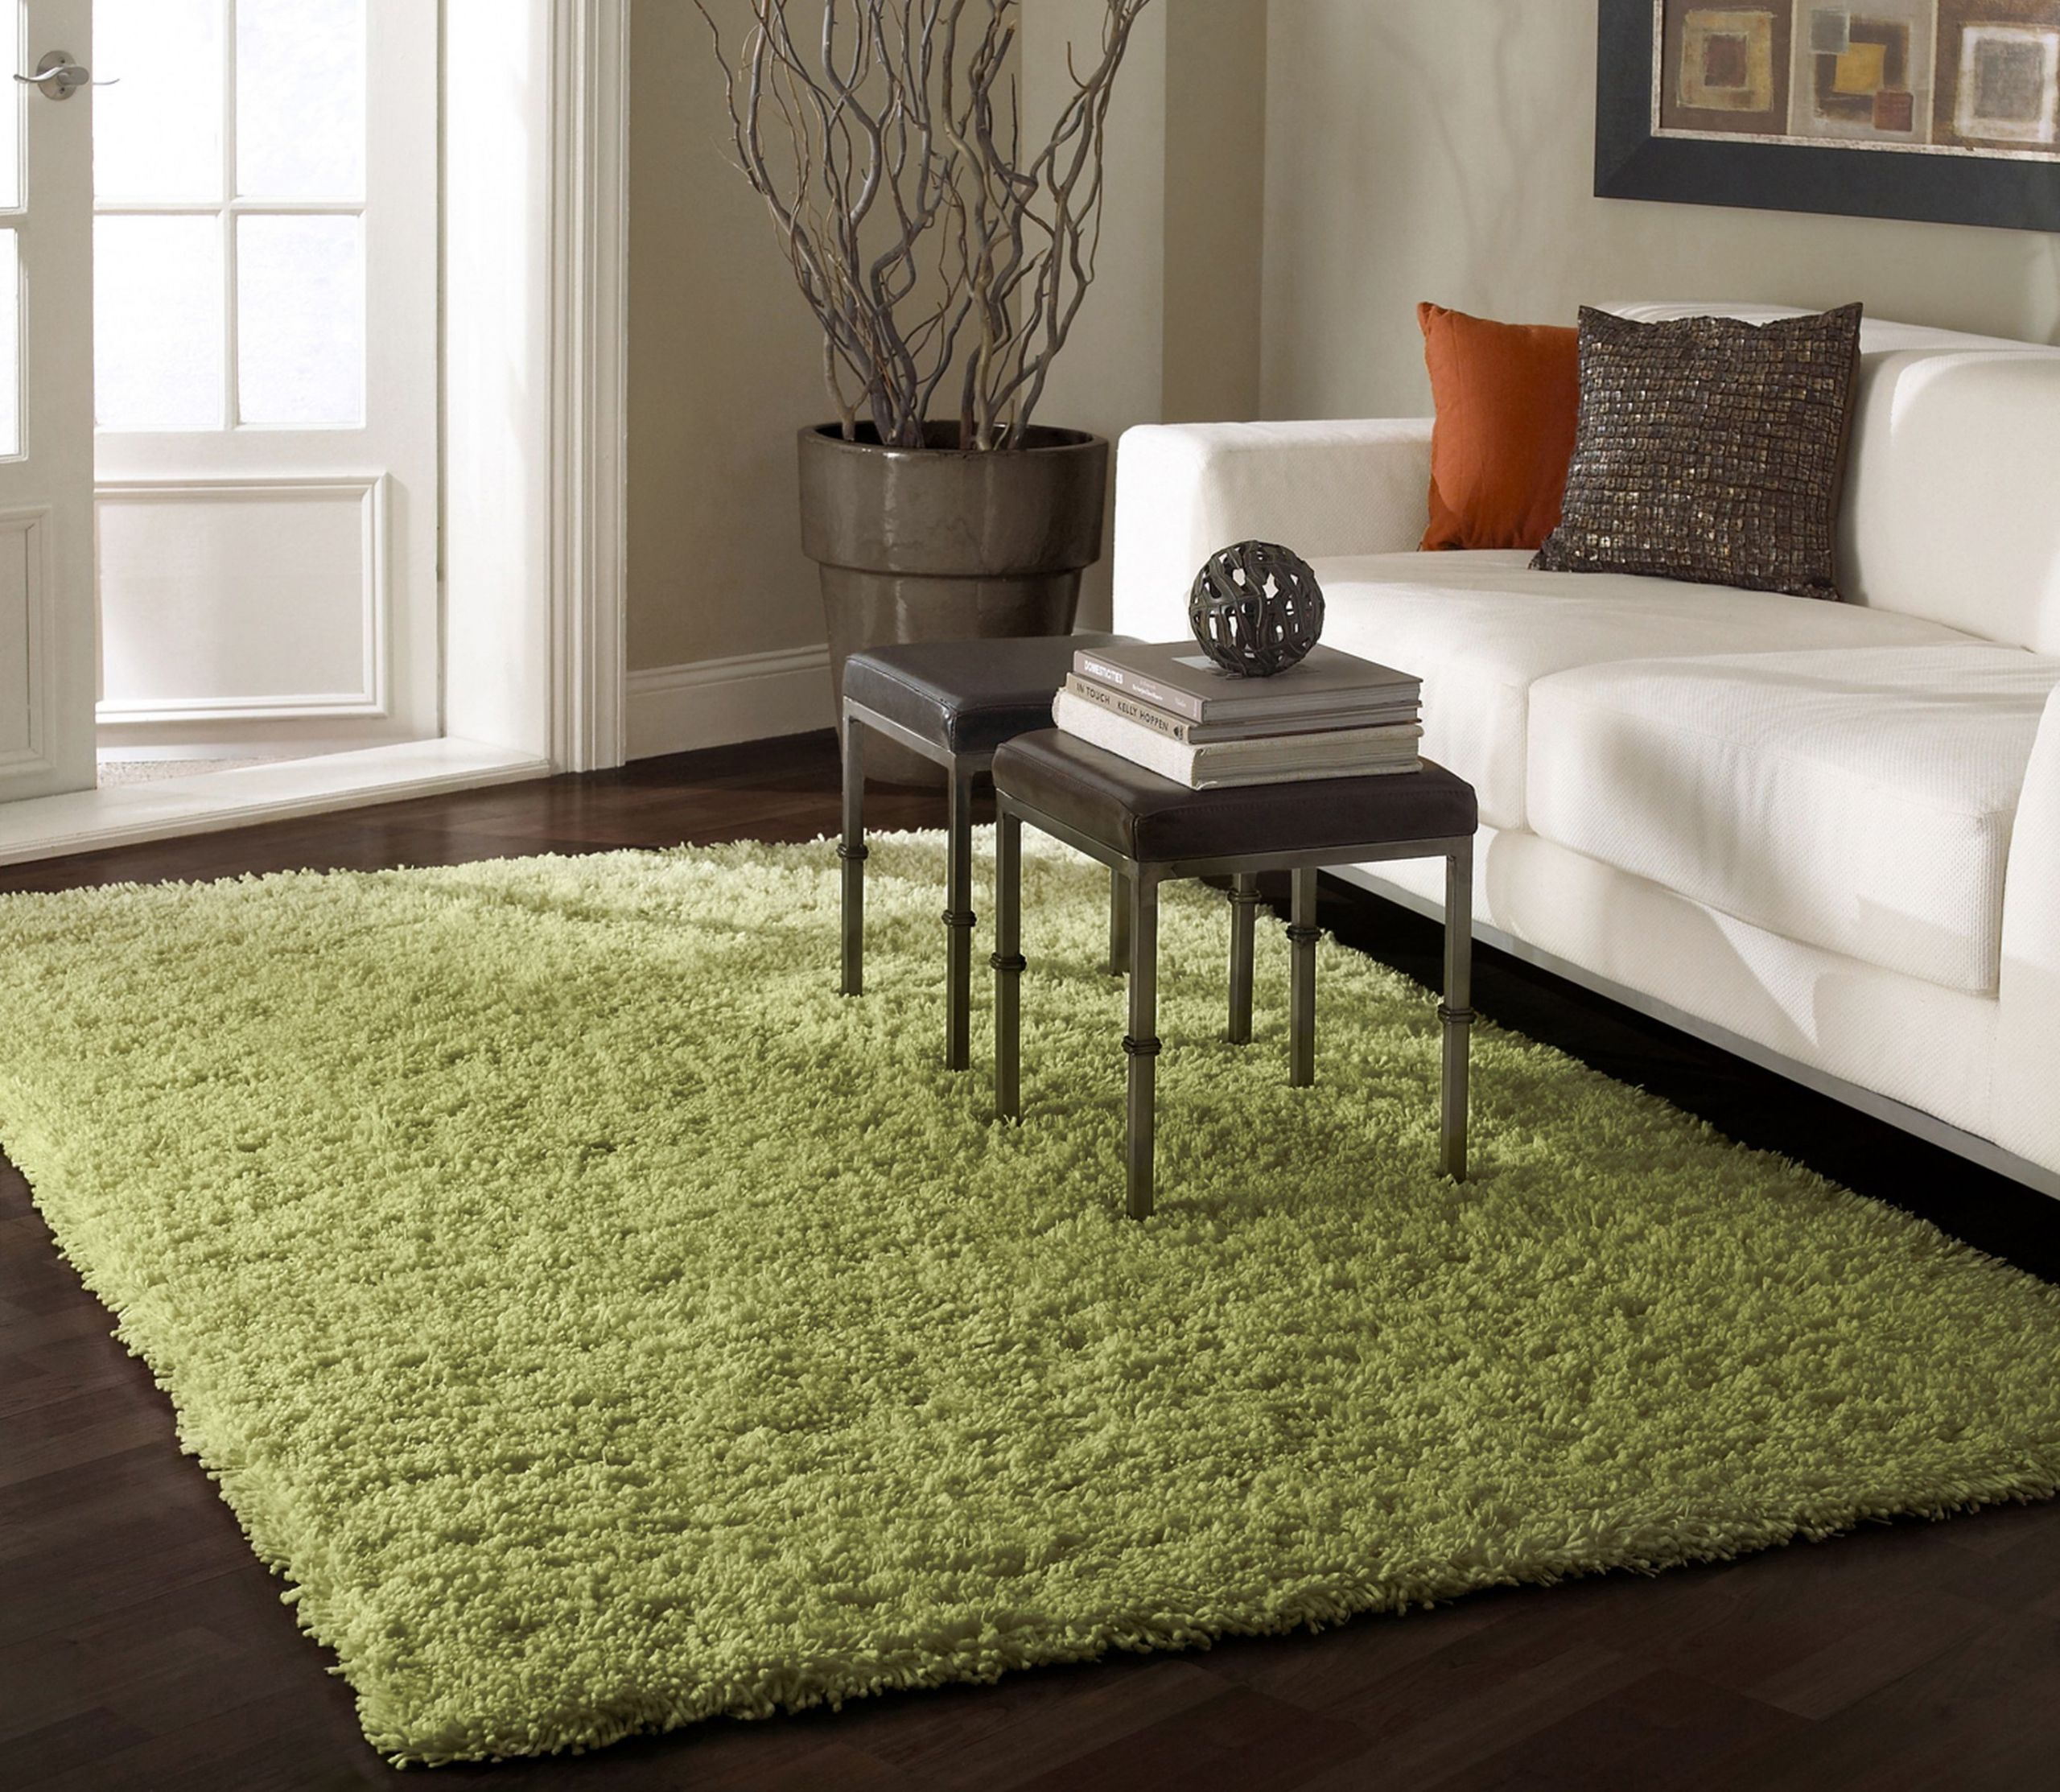 Living Room Rugs Target
 Flooring Wonderful Collection Tar Area Rug With